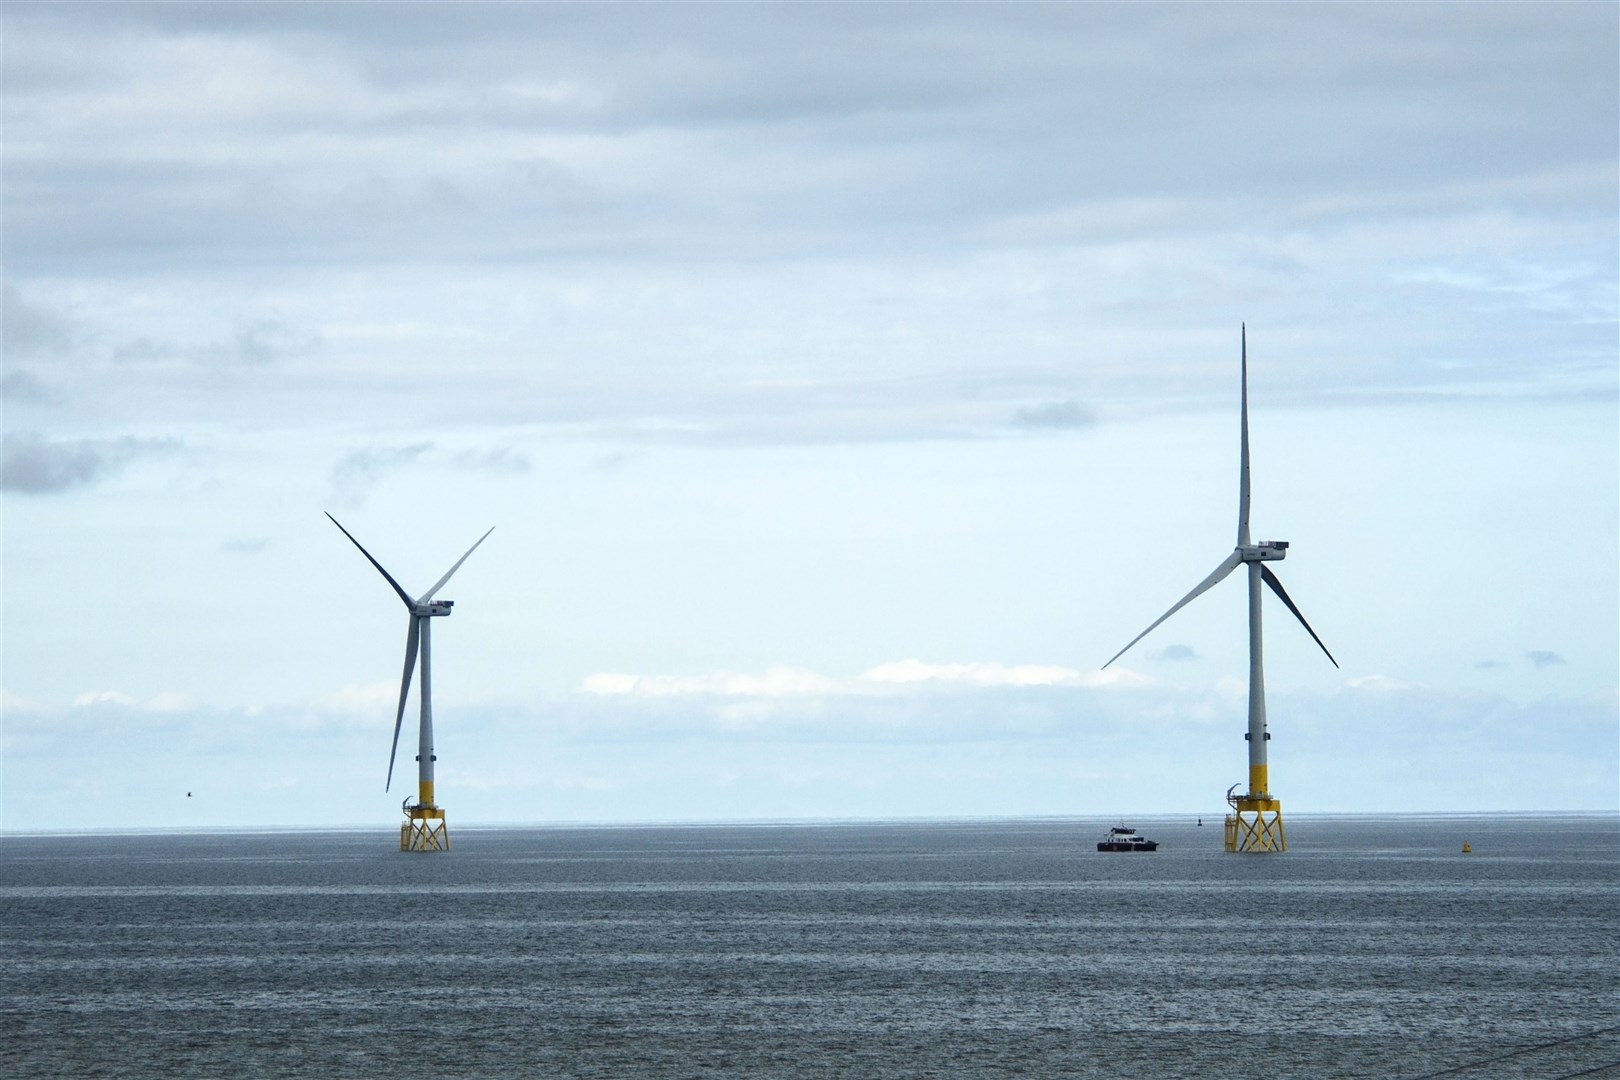 The UK’s Offshore Wind Sector Deal has a commitment to grow UK content of offshore wind to 60 per cent.